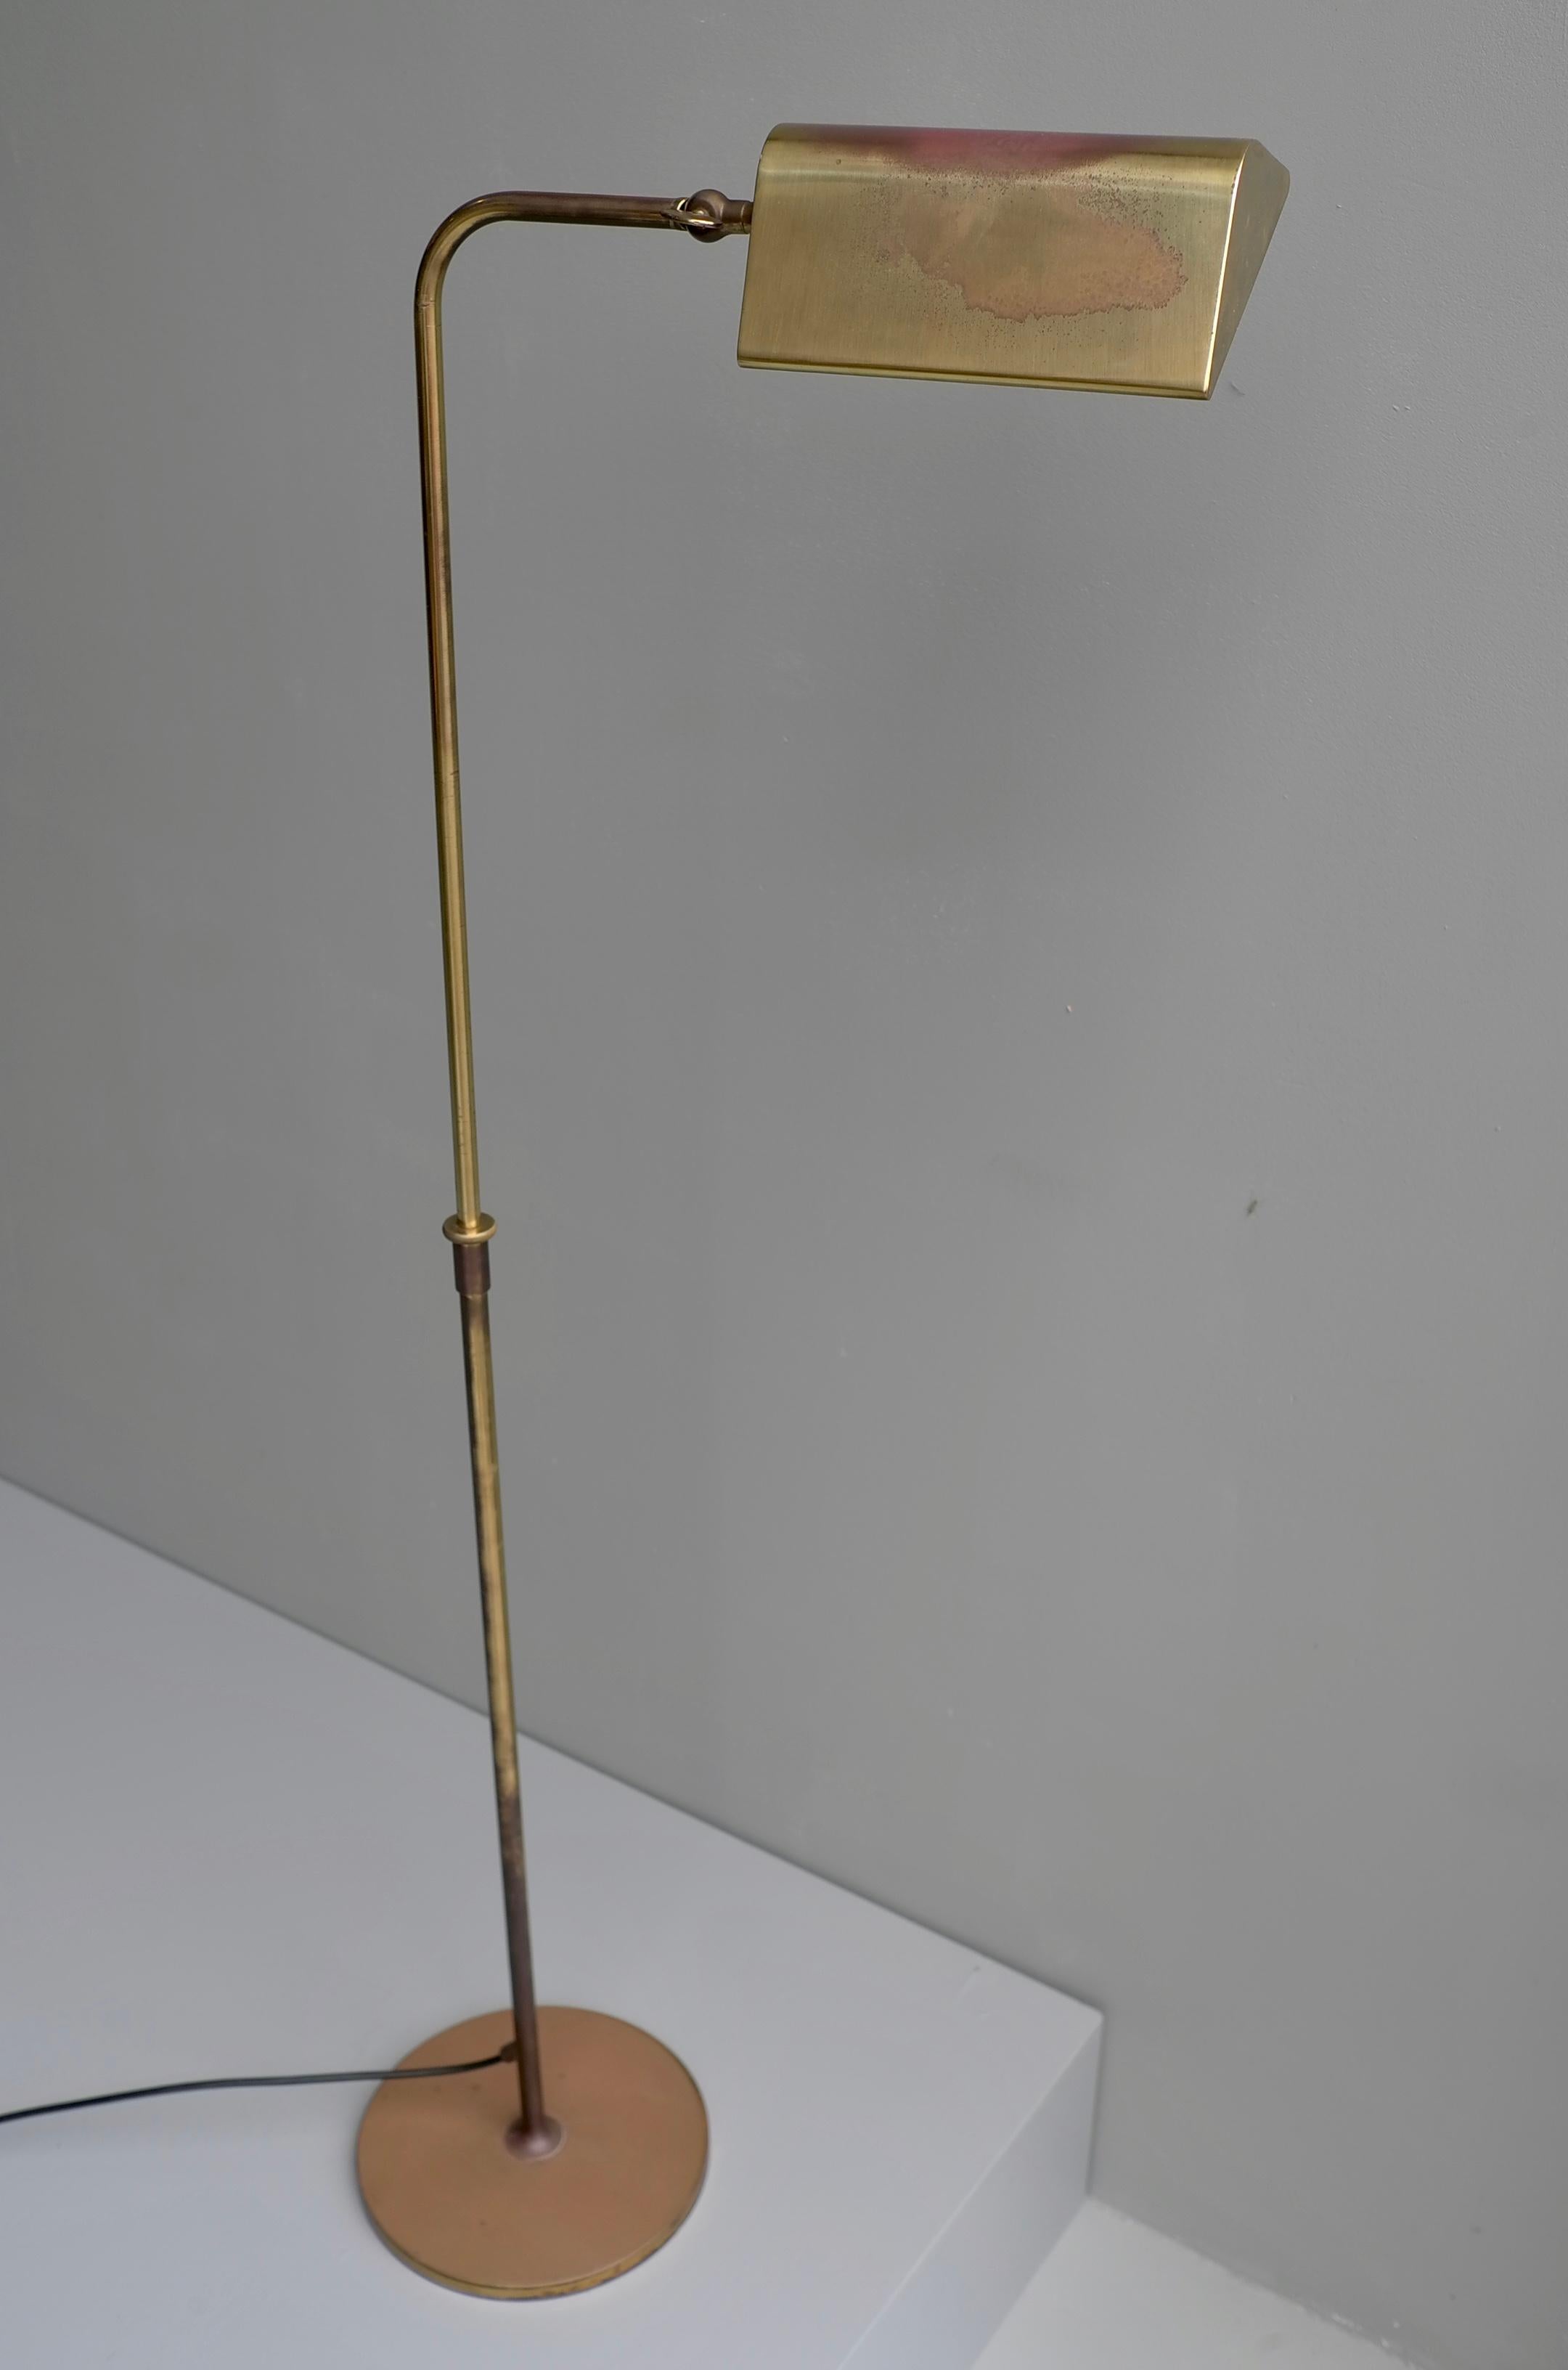 Mid-20th Century Florian Schulz Adjustable Copper and Brass Library Floor Lamp with Patina For Sale